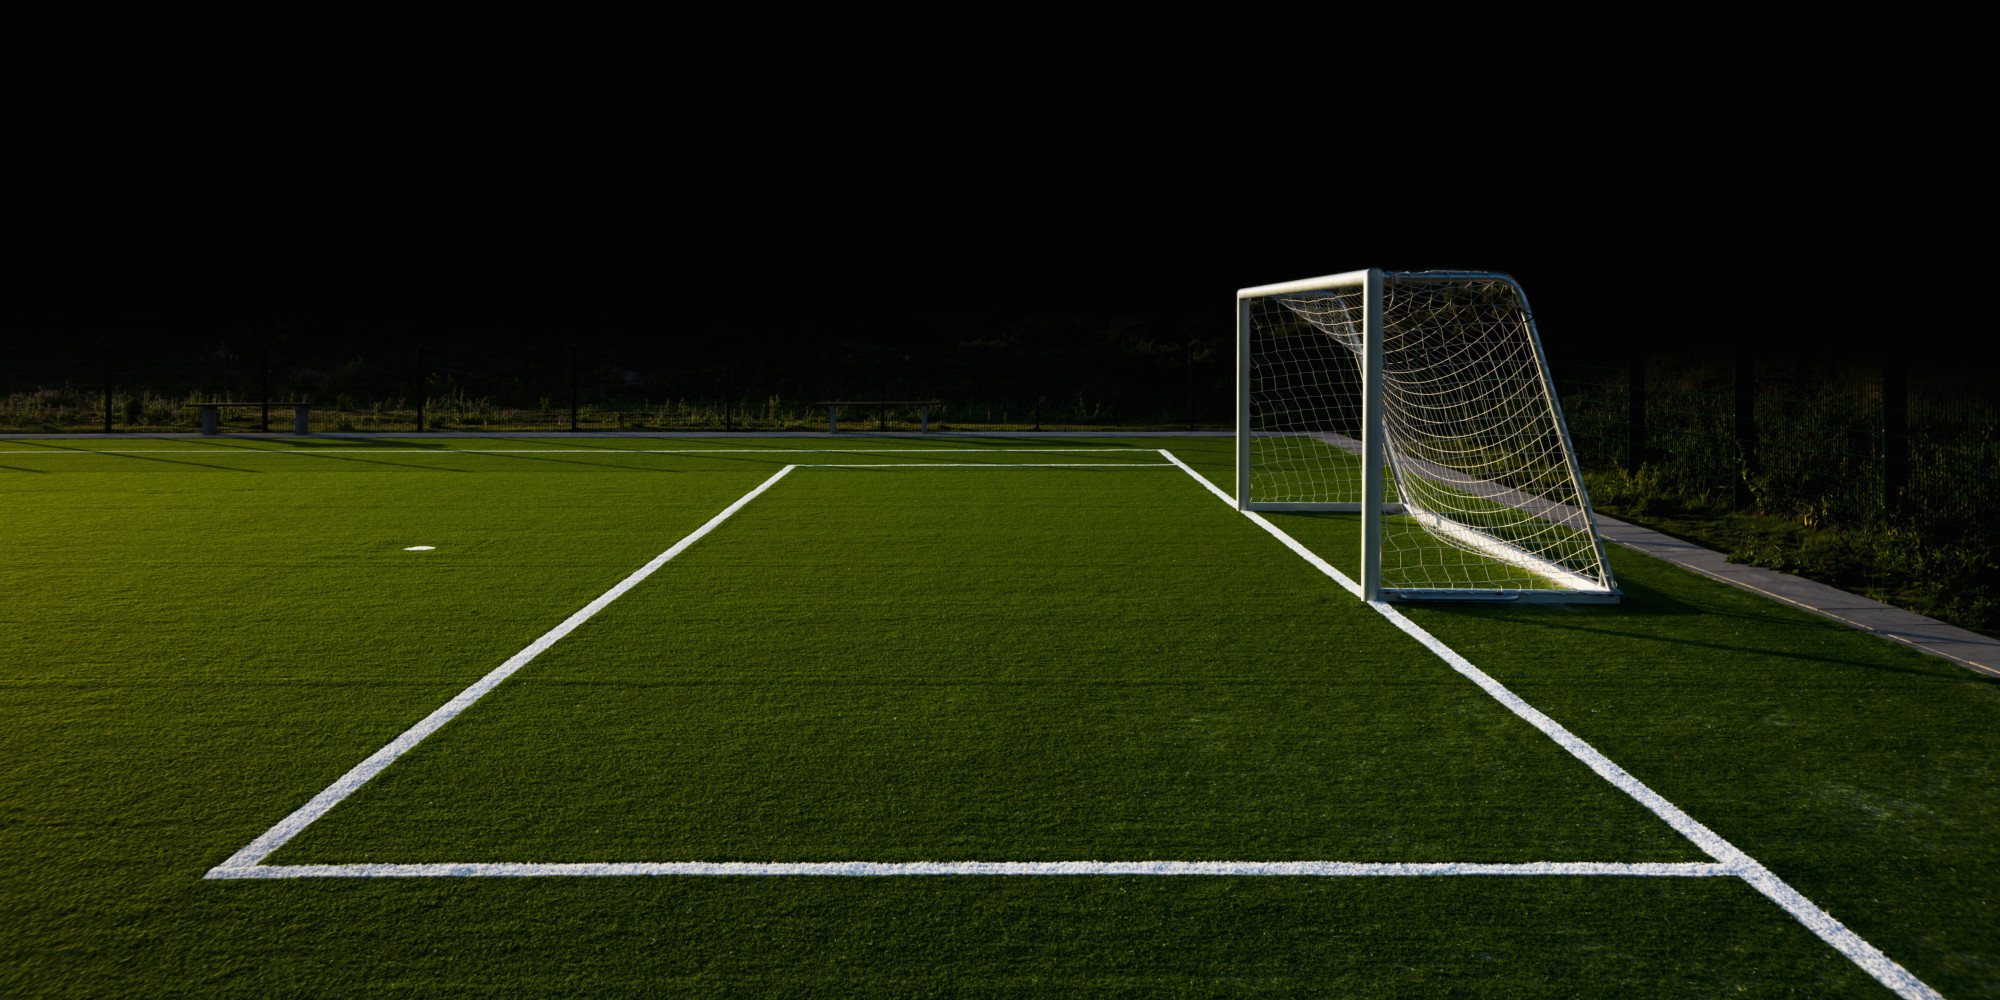 Soccer Field and Goal